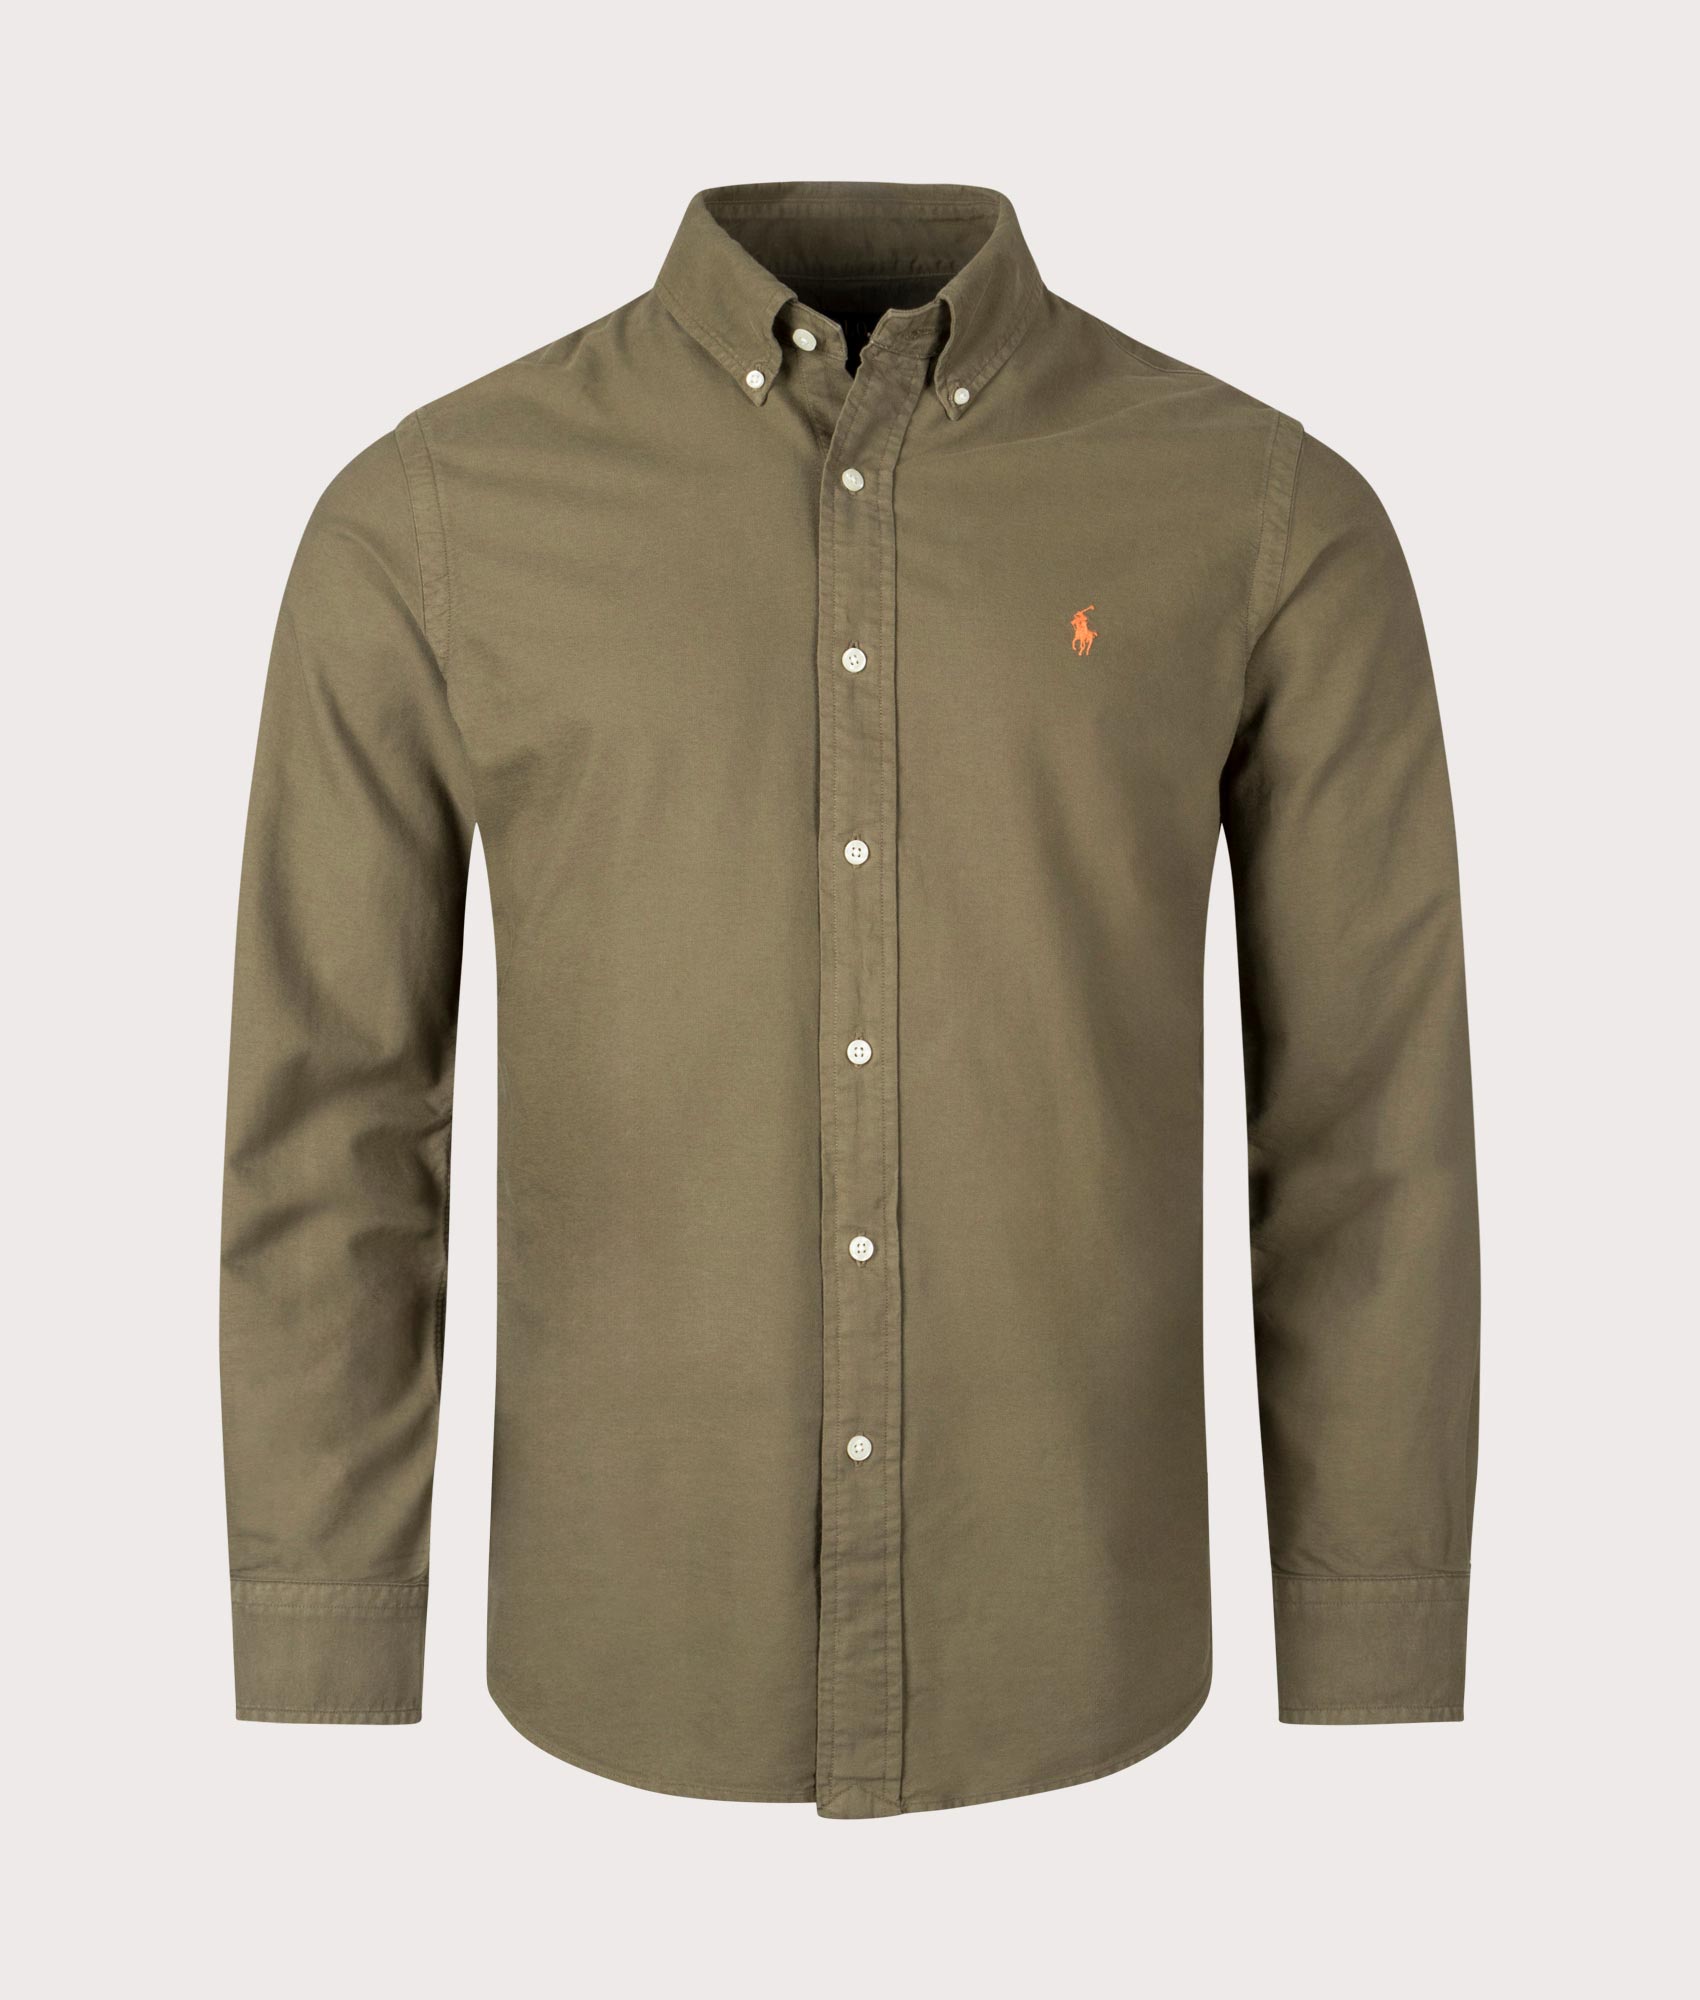 Polo Ralph Lauren Mens Custom Fit Garment-Dyed Oxford Shirt - Colour: 006 Canopy Olive - Size: Large